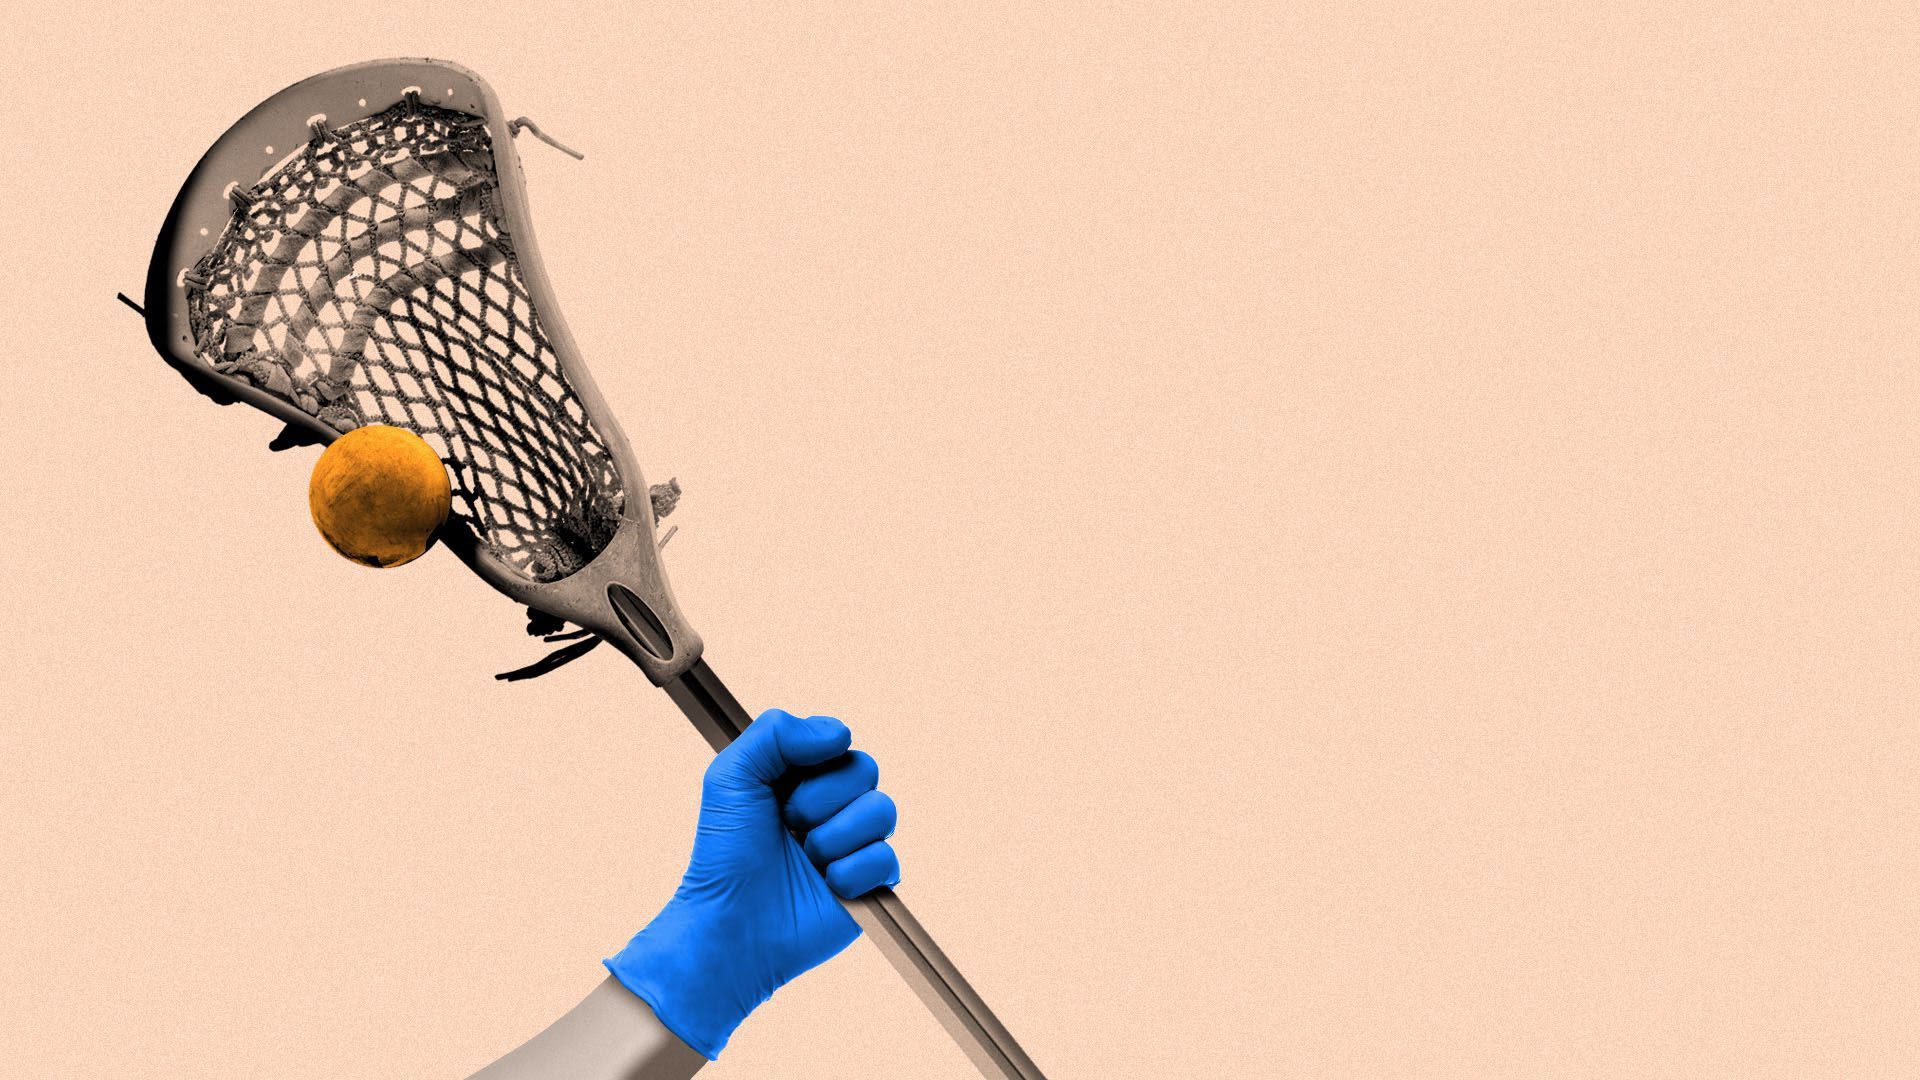 llustration of a lacrosse player wearing a glove